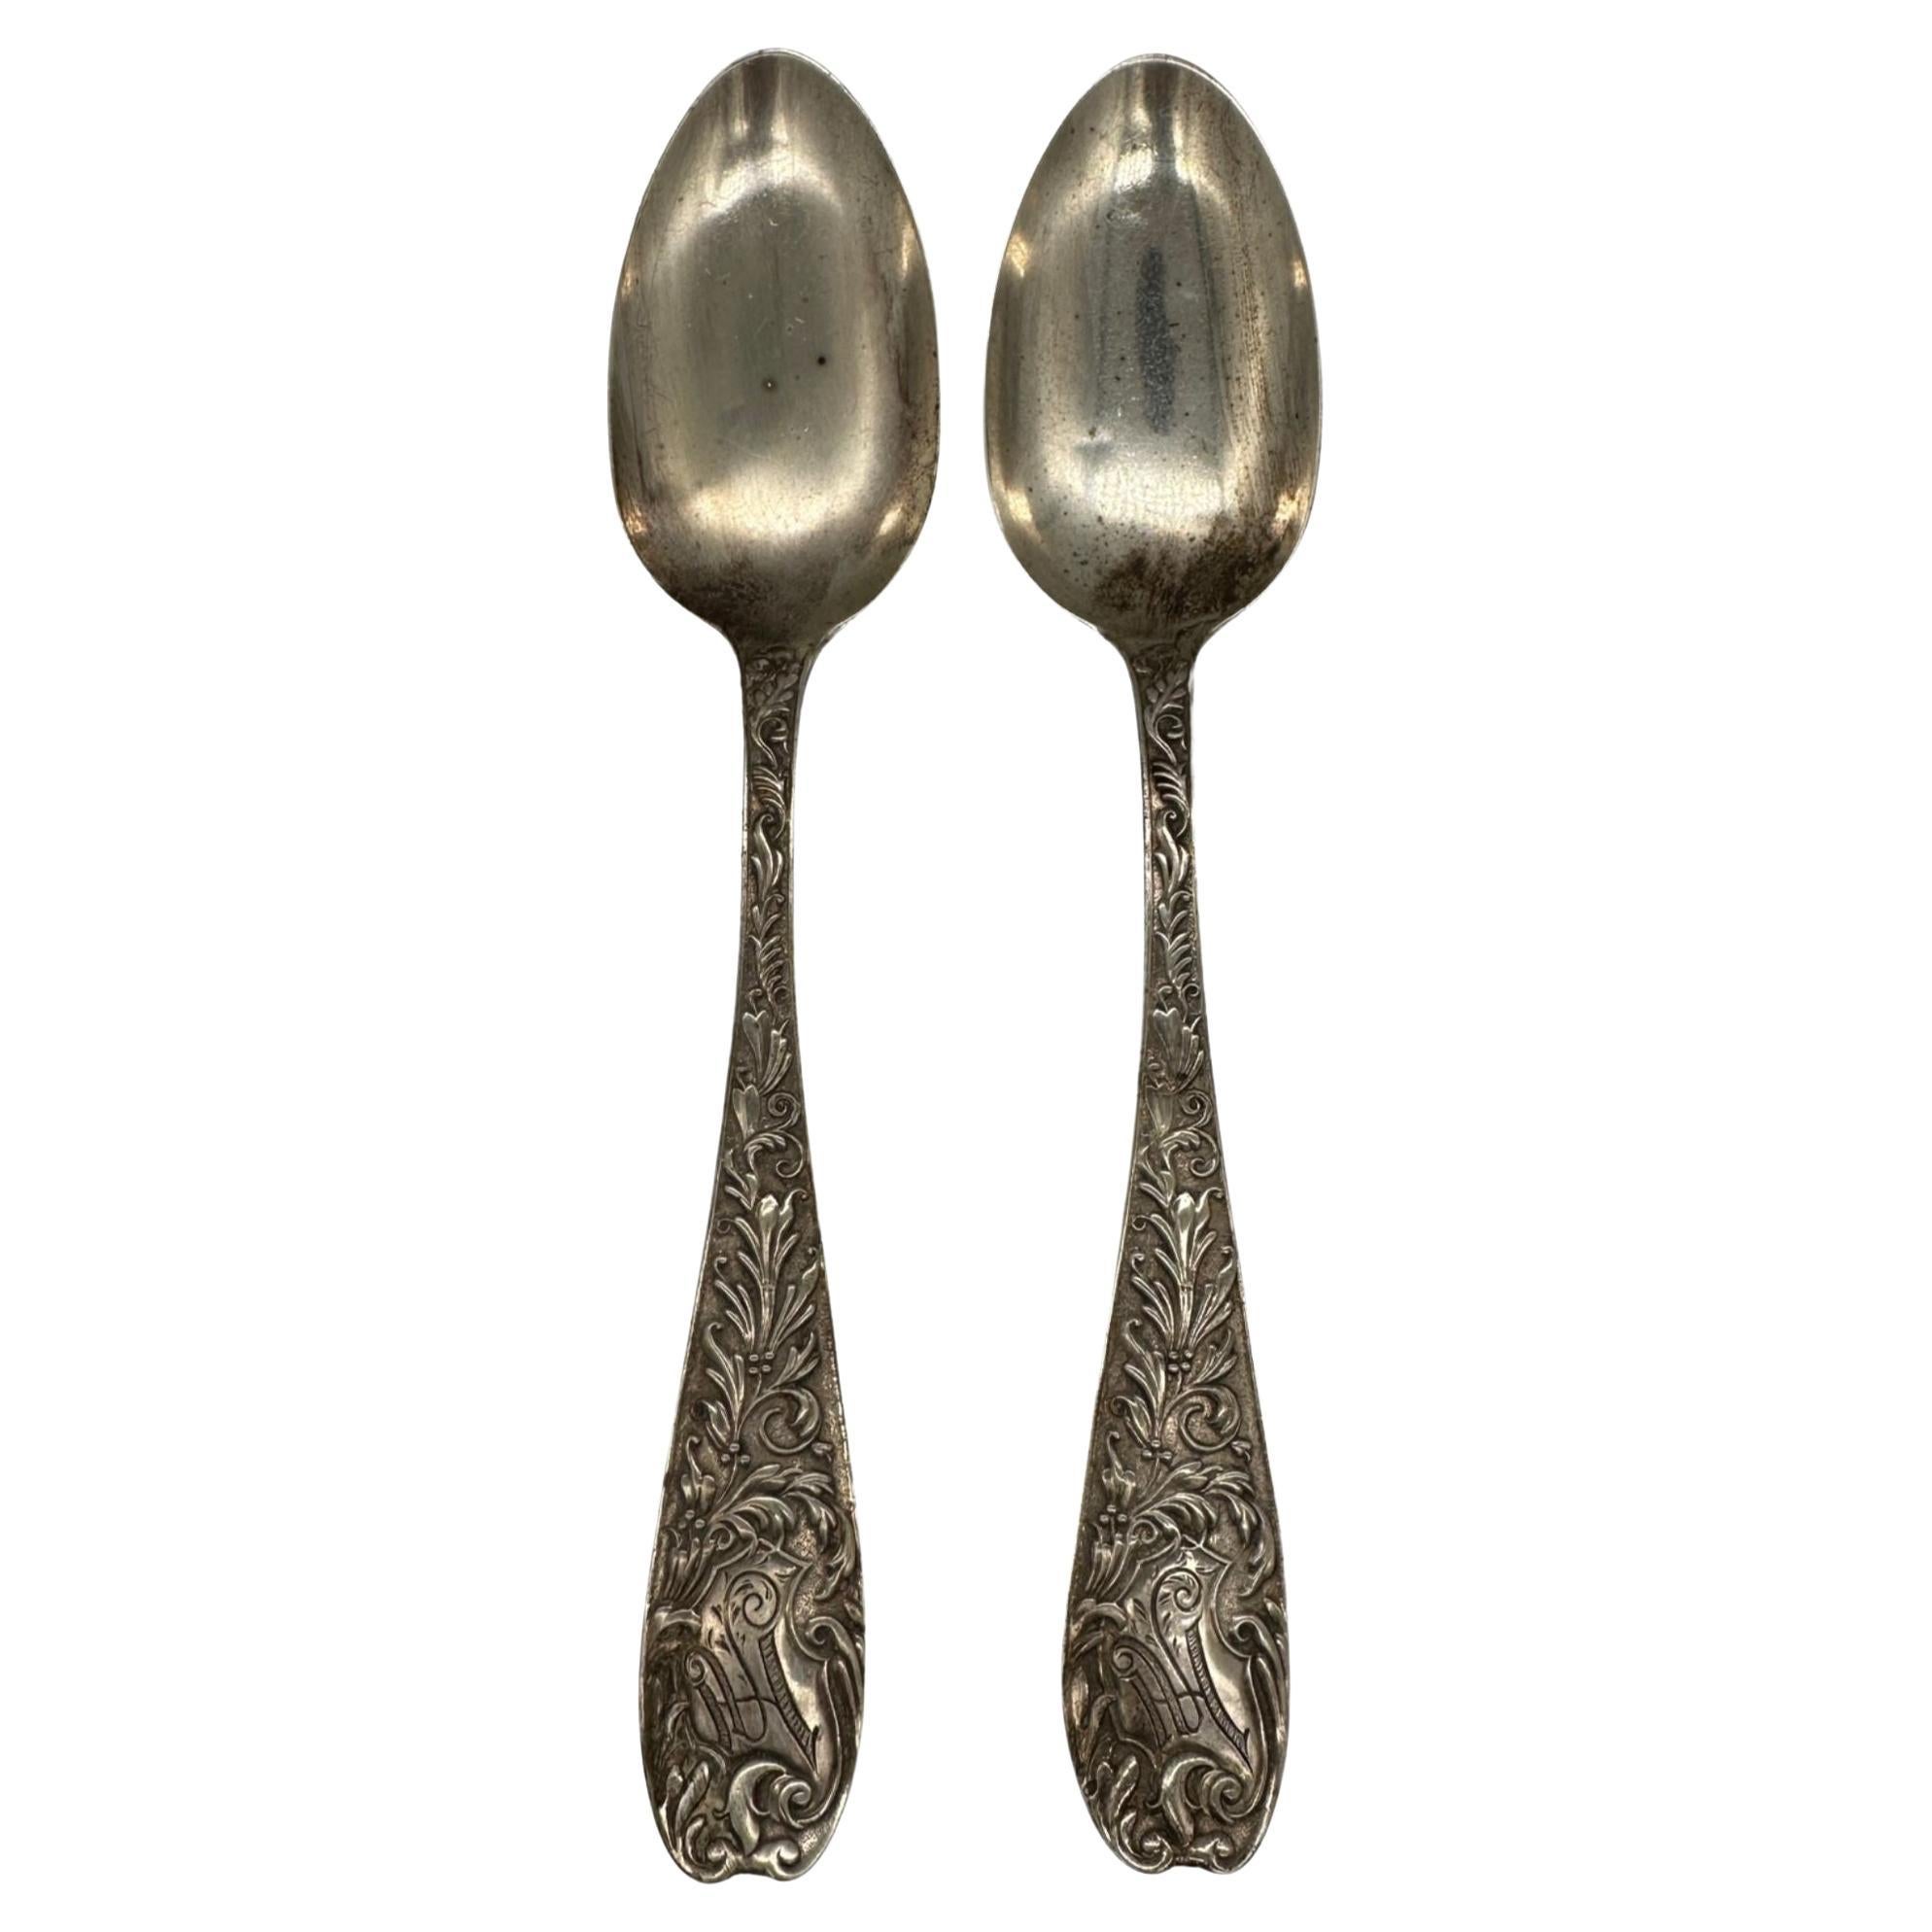 How much is a silver serving spoon worth?